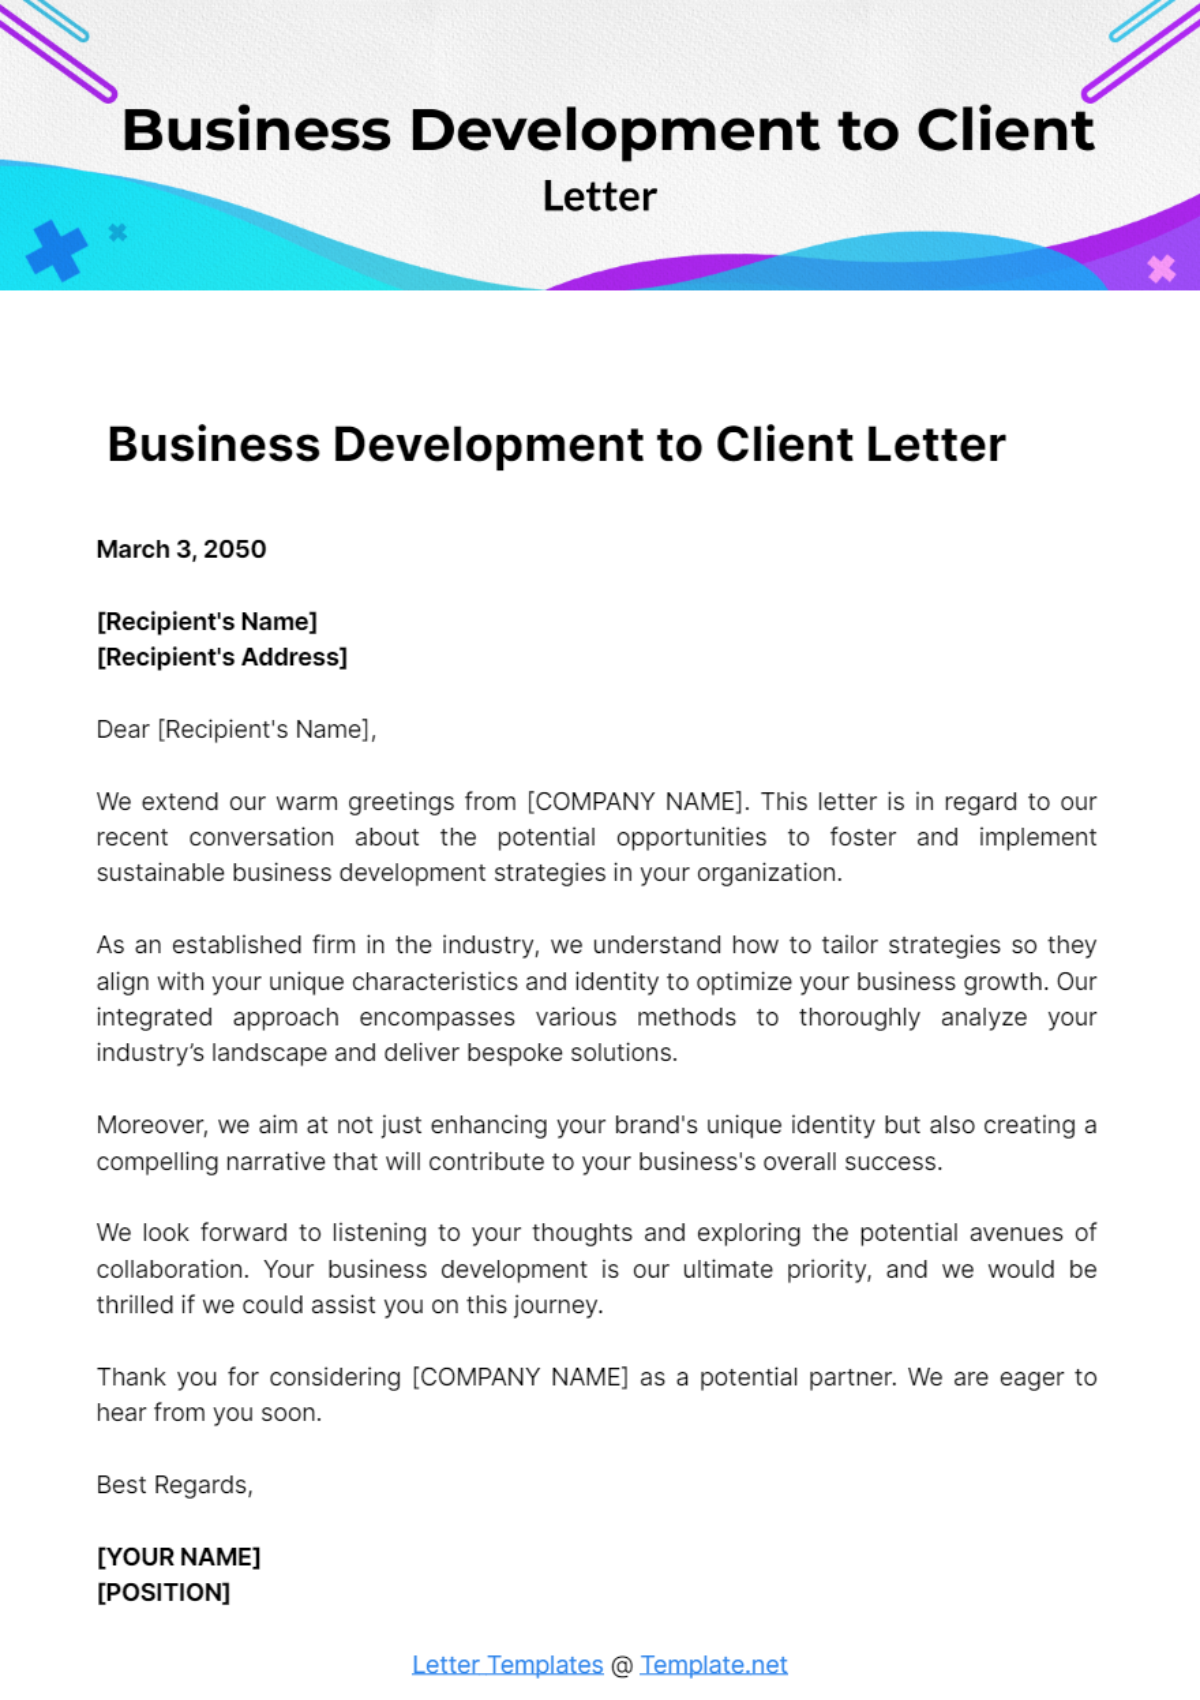 Business Development Letter to Client Template